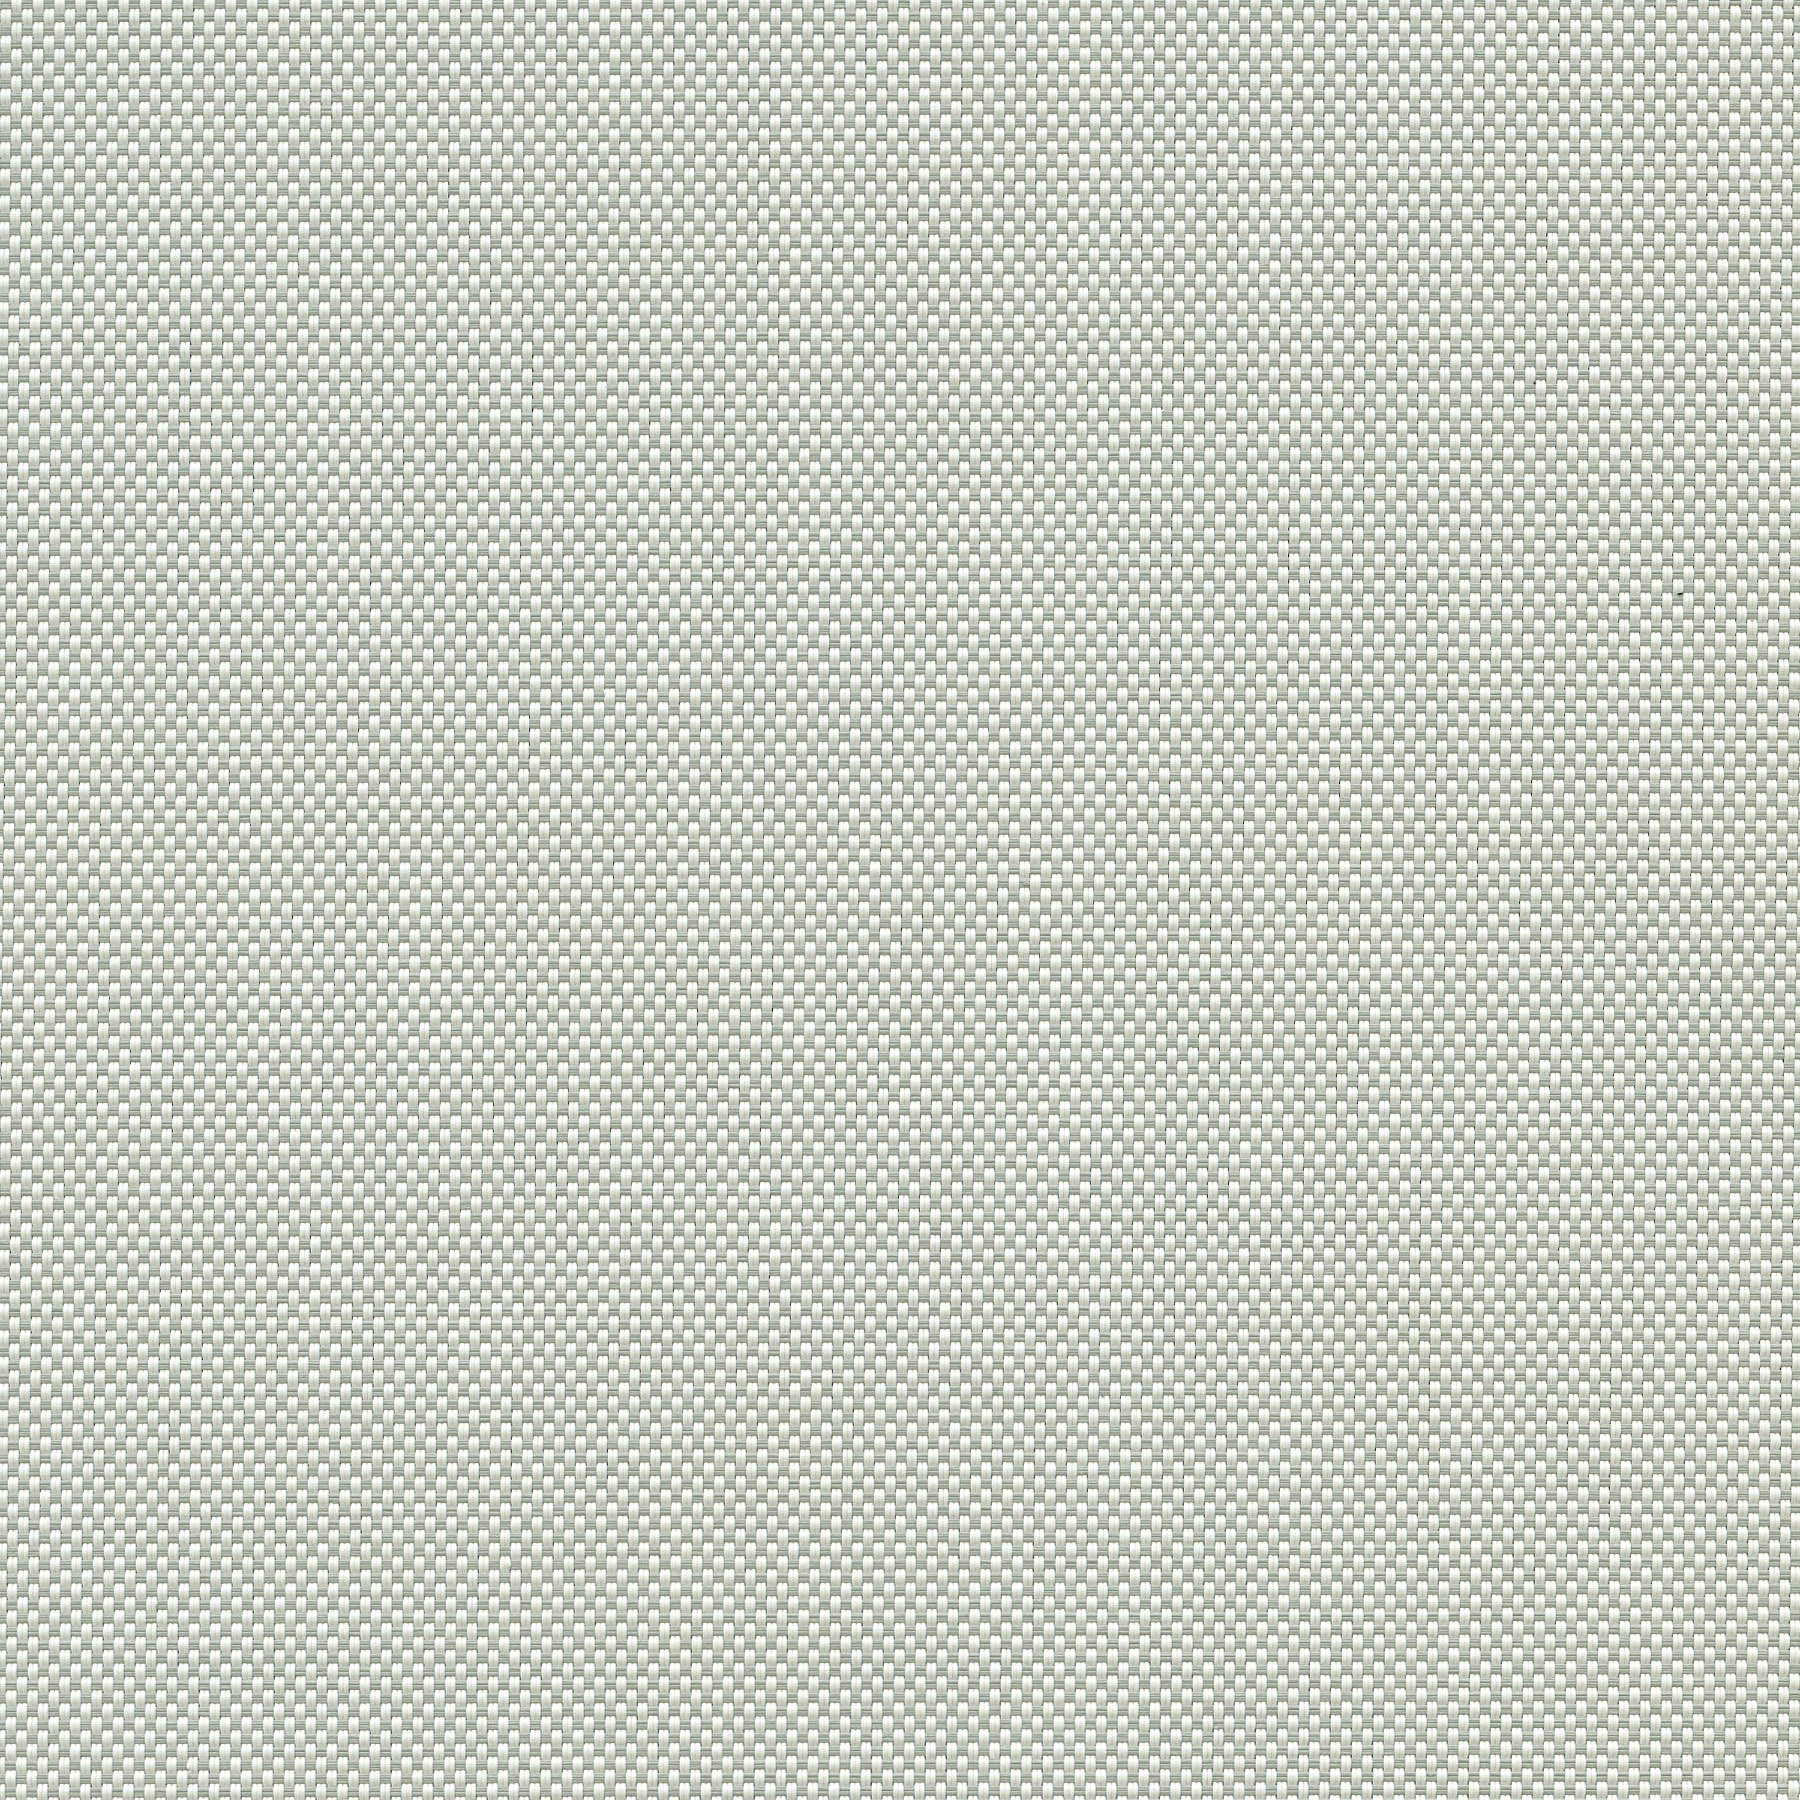 Altex - Fabric - SHEERWEAVE 2500 - Oyster-Pearl Grey - 50P14